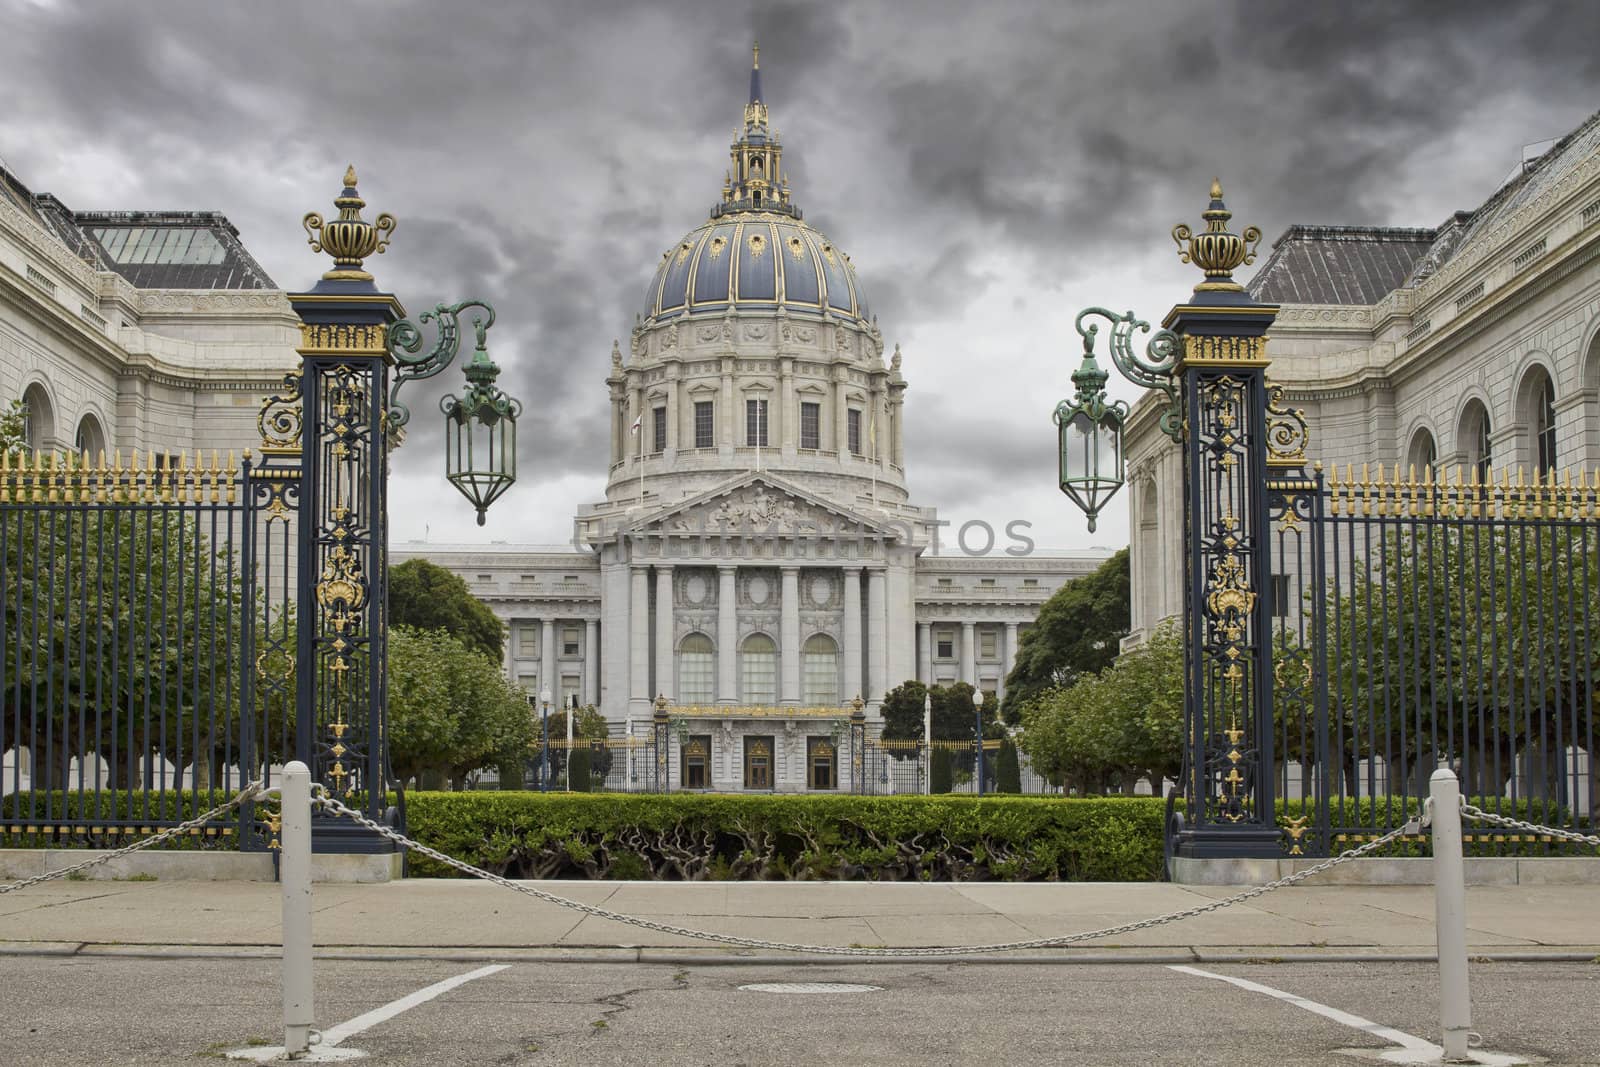 Stormy Sky over San Francisco City Hall by jpldesigns